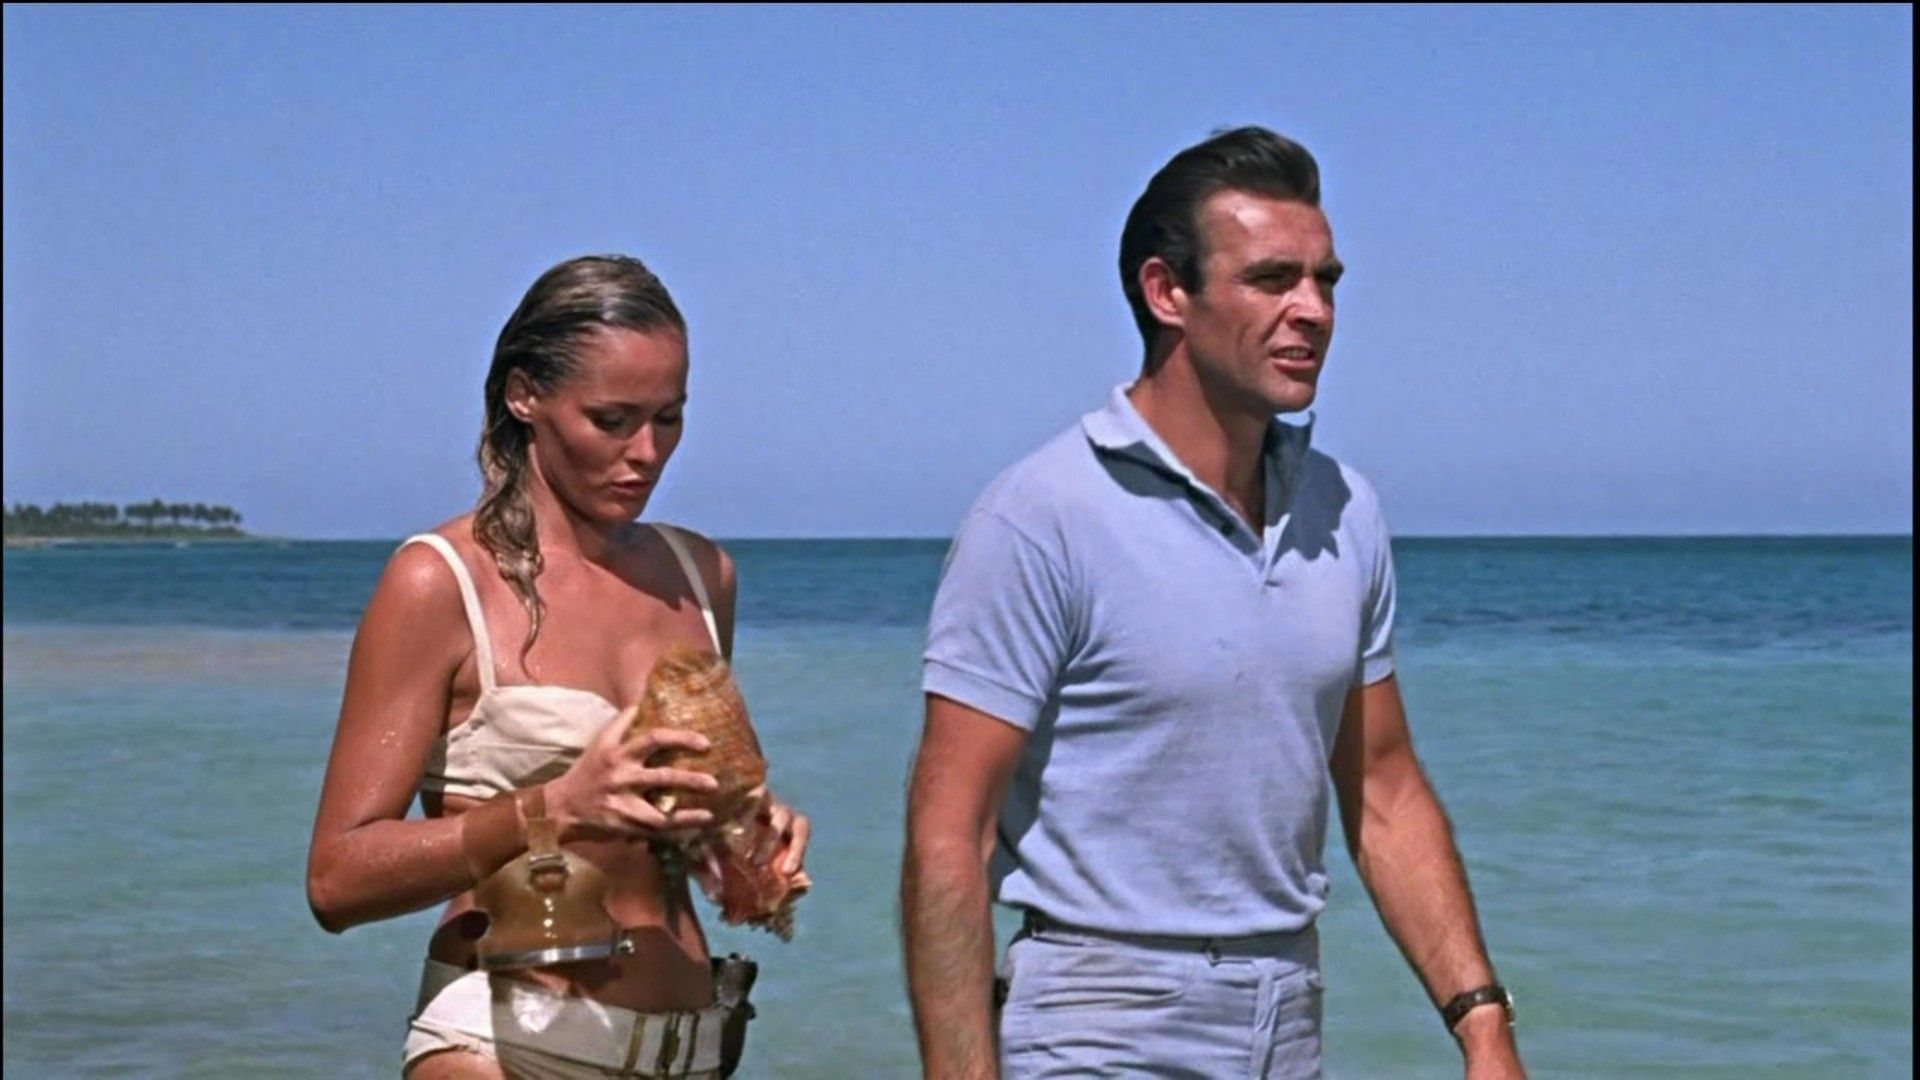 Sean Connery and Ursula Andress in Dr No beach meeting